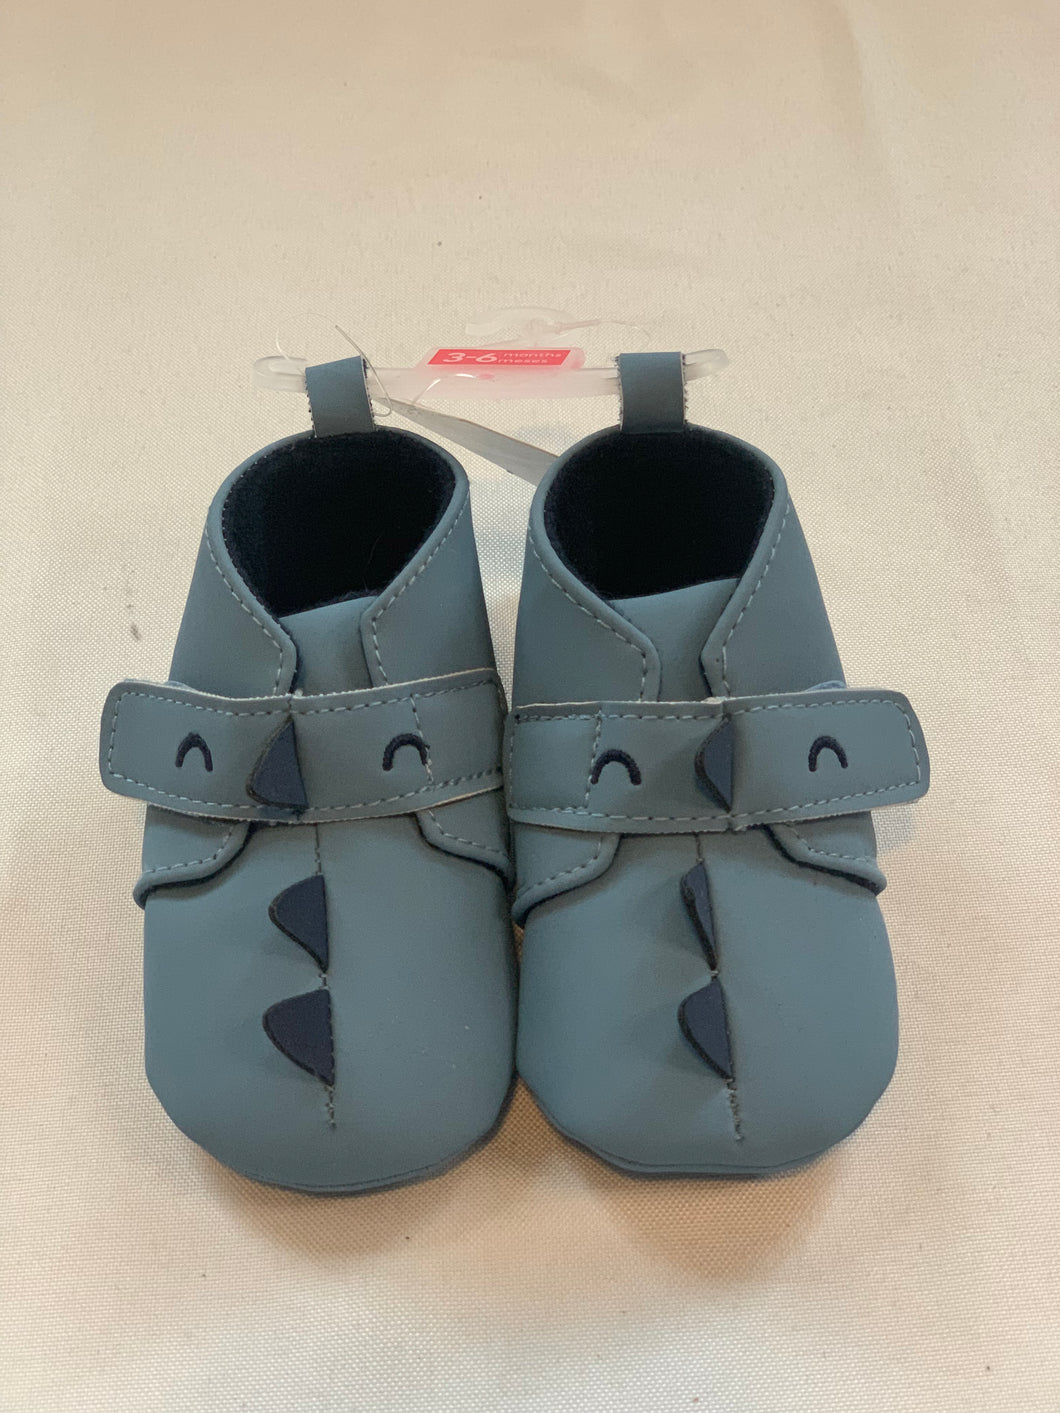 Shoes NWT, Size 3-6m